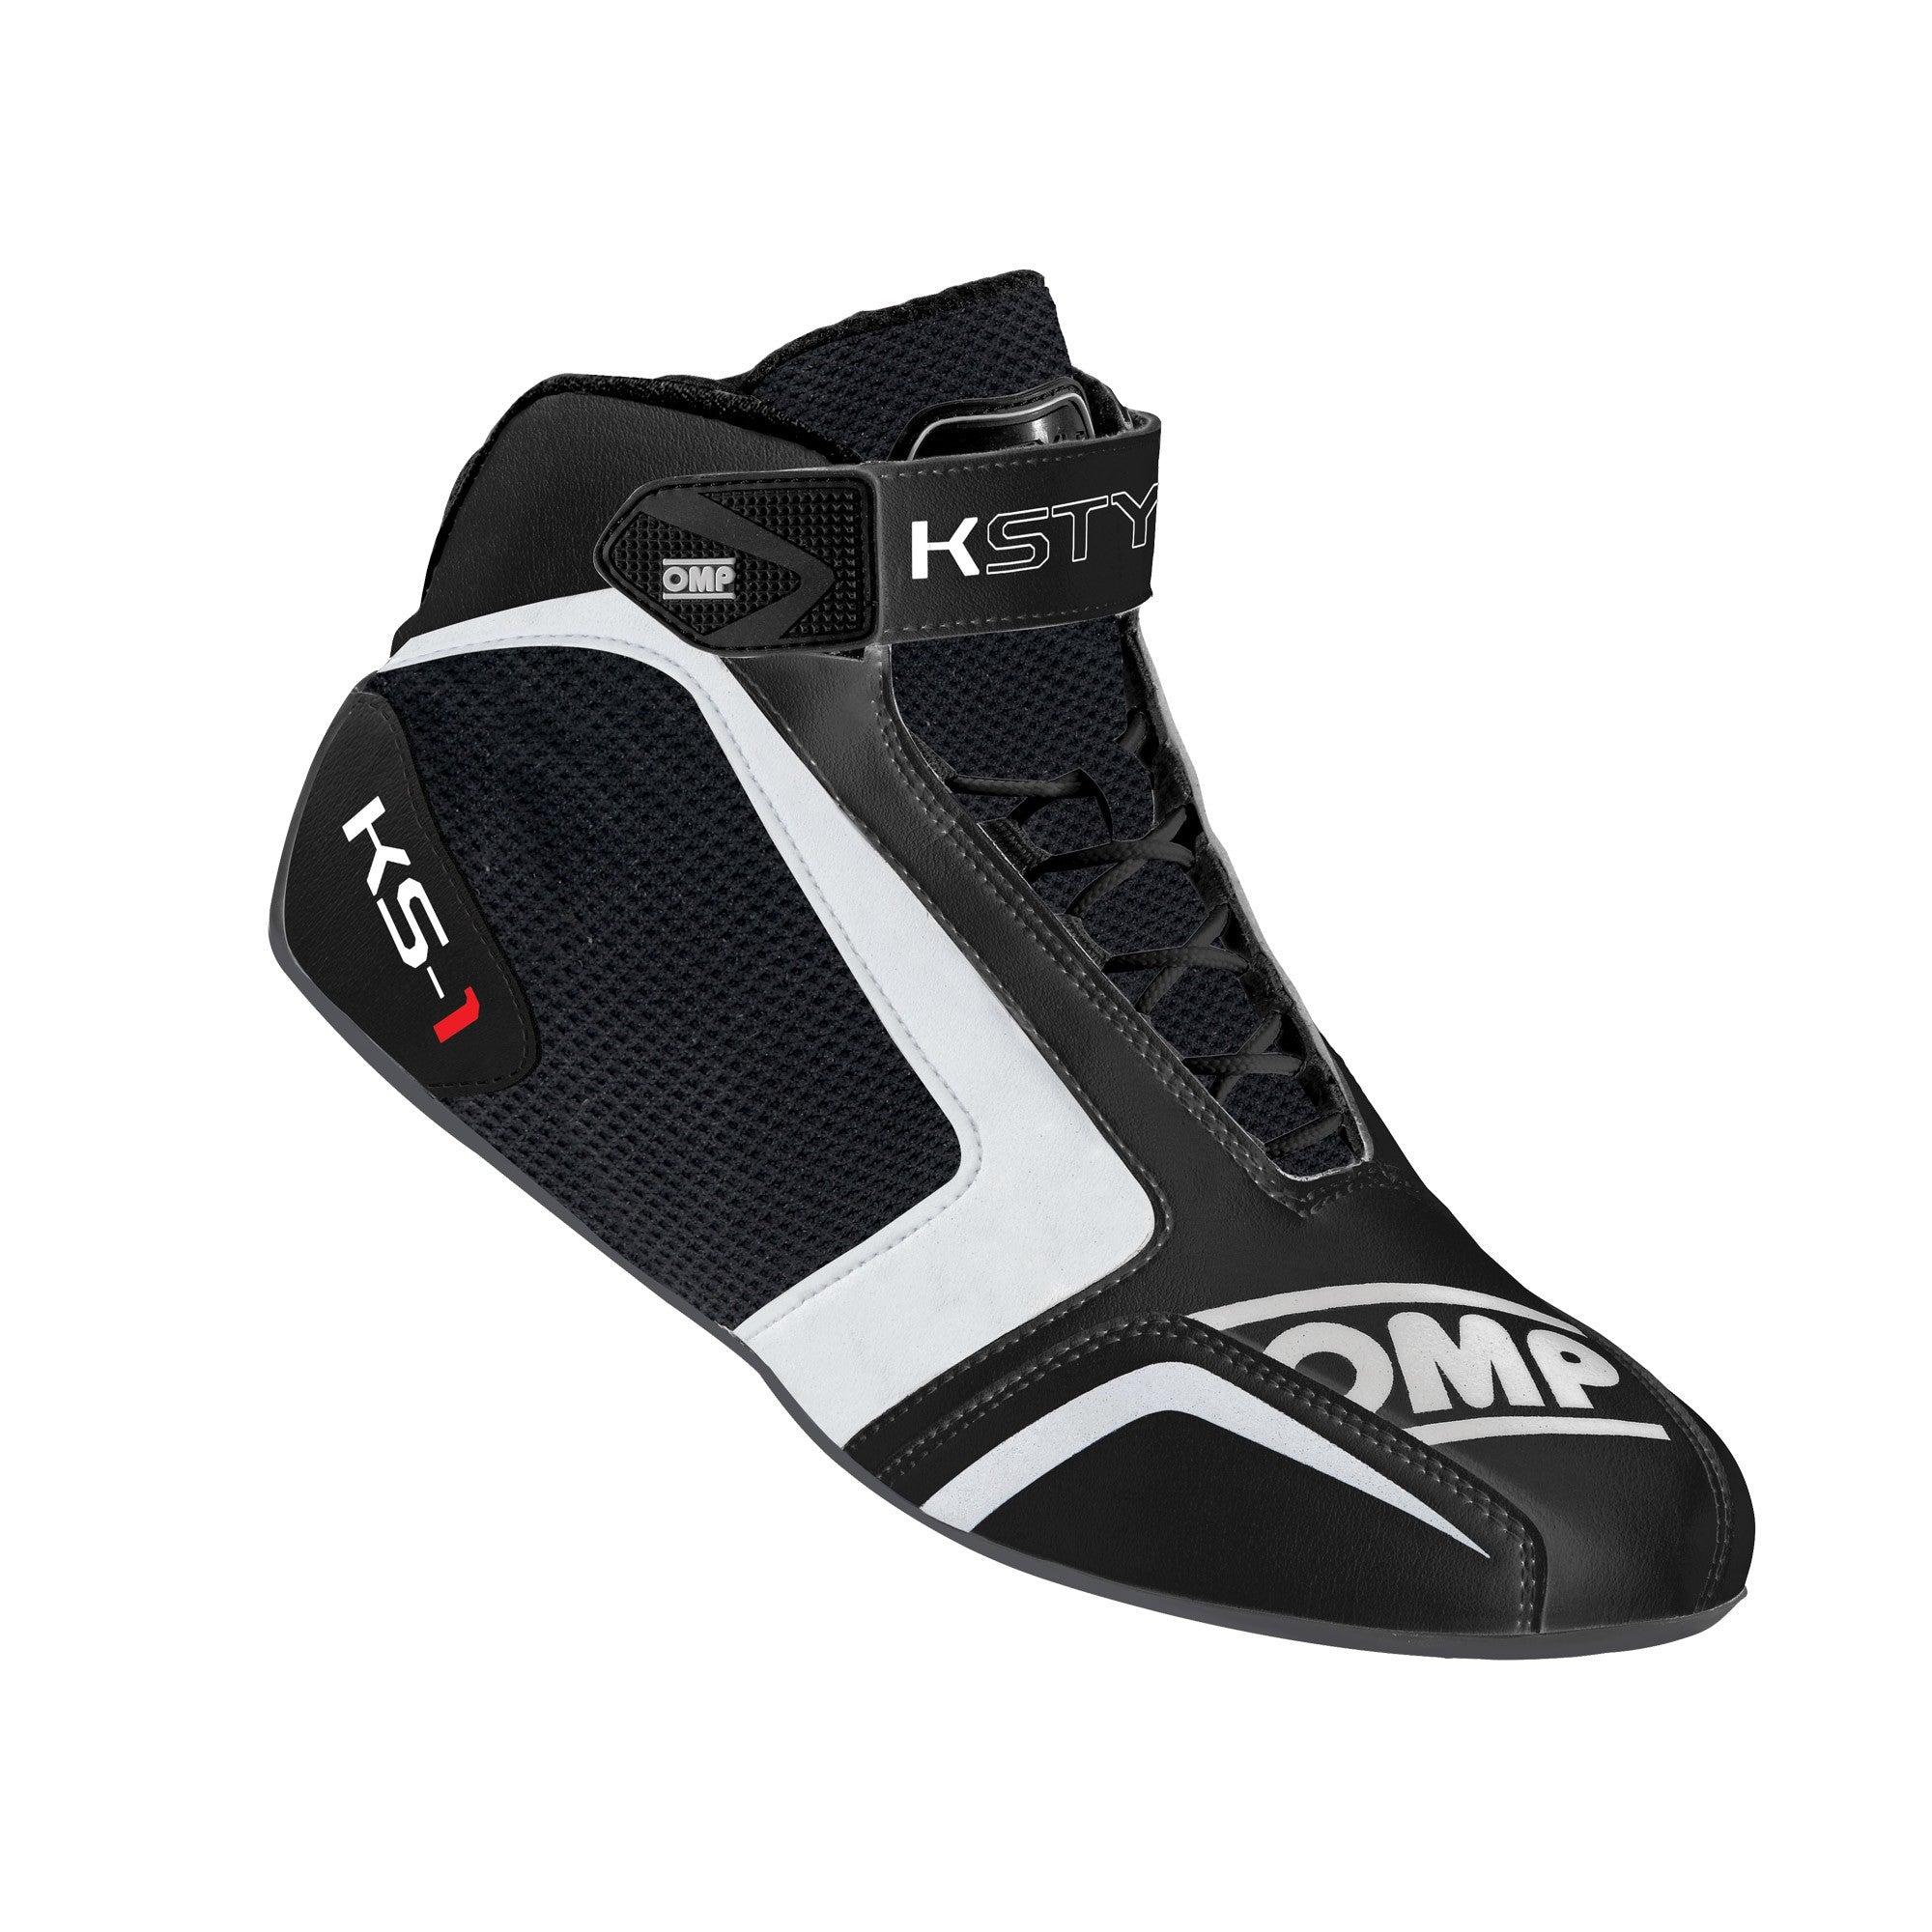 OMP KARTING SHOE KS-1 - Professional Racing Shoes, Paragon Competition